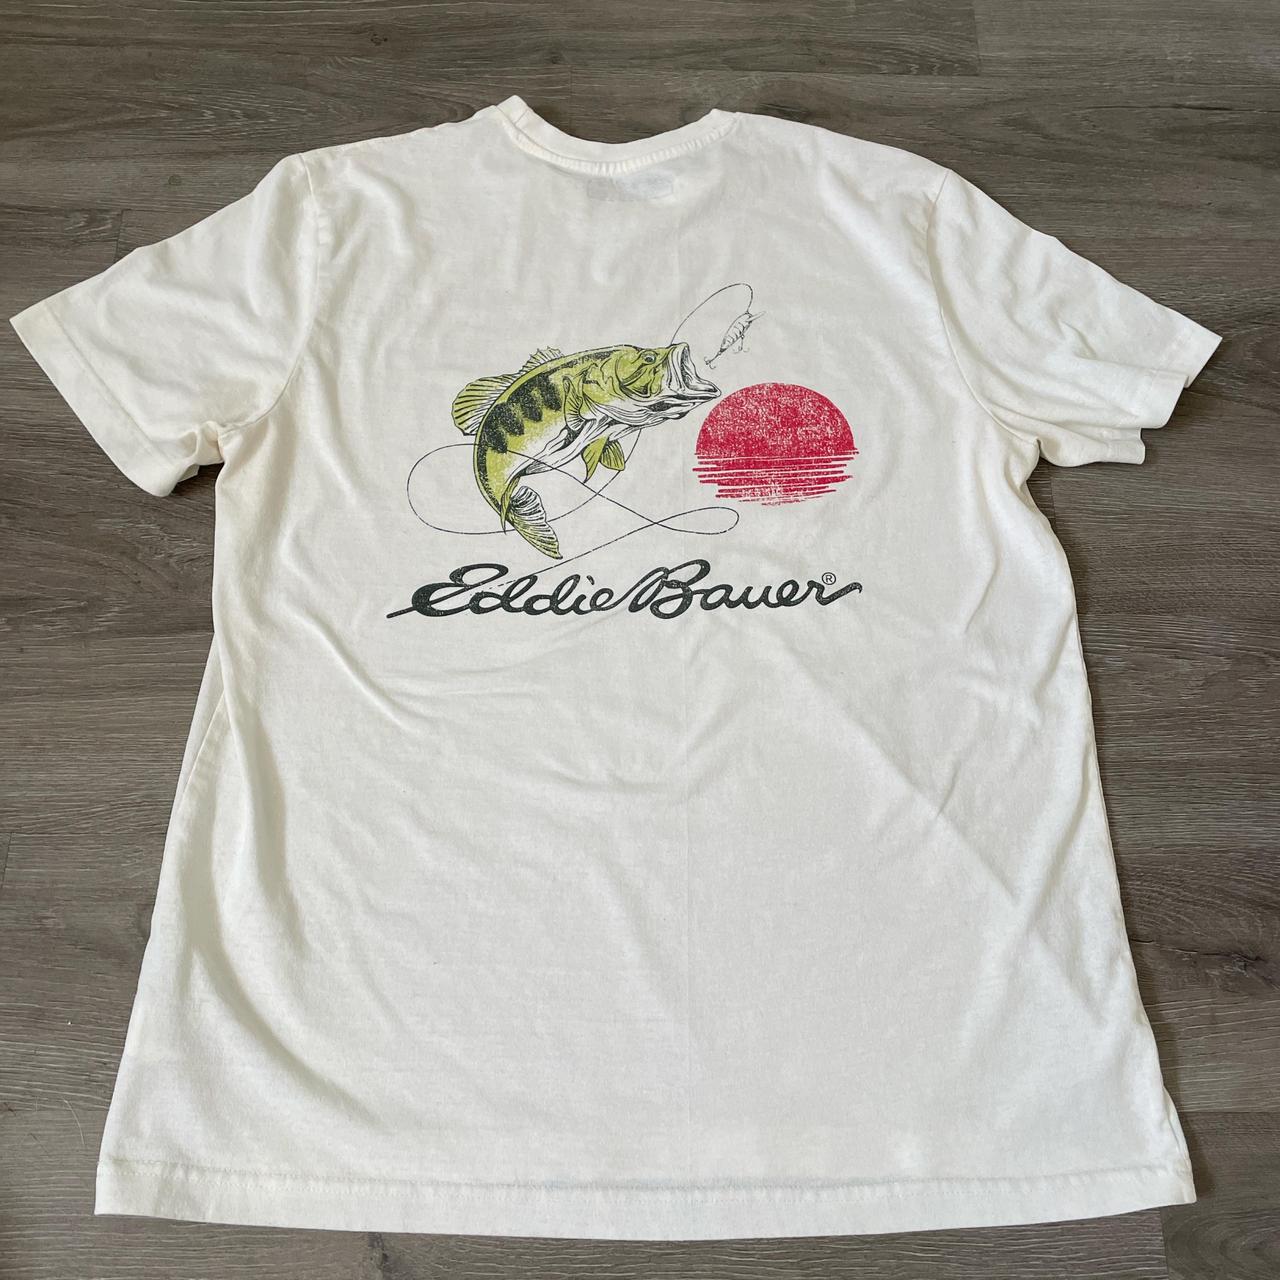 Eddie Bauer size large t shirt. No stains or